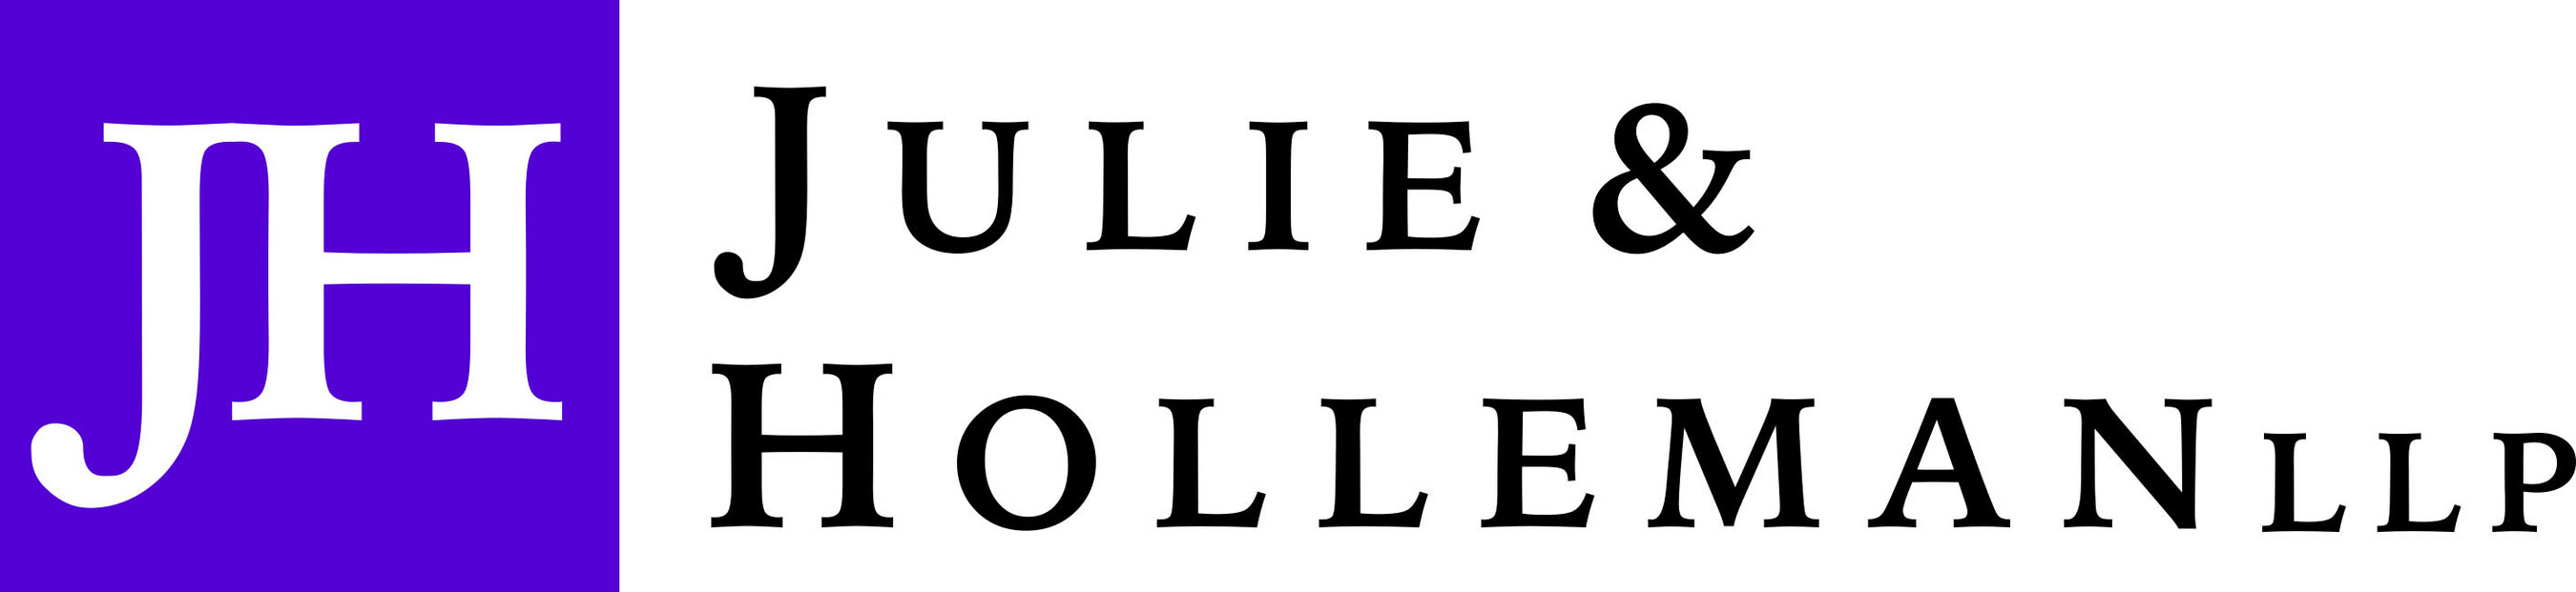 Julie & Holleman LLP is a boutique law firm that focuses on shareholder litigation, including derivative actions, mergers and acquisitions cases, securities fraud class actions, and corporate investigations.